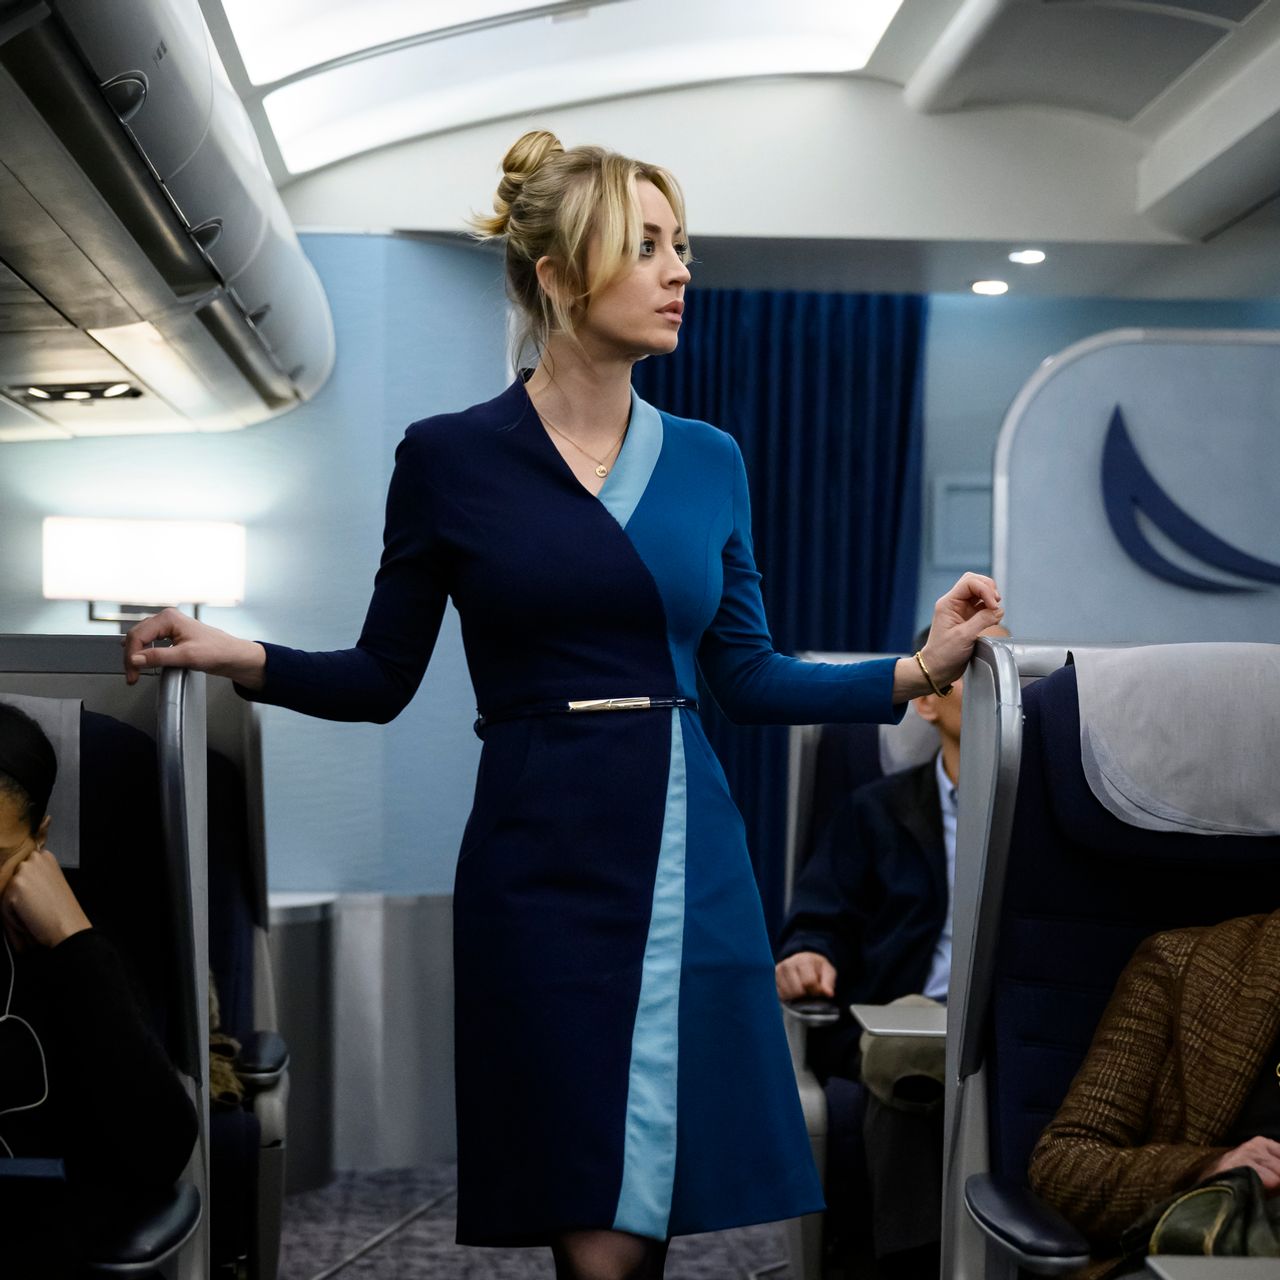 ‘The Flight Attendant’ presents a pleasant outing because of Kaley Cuoco